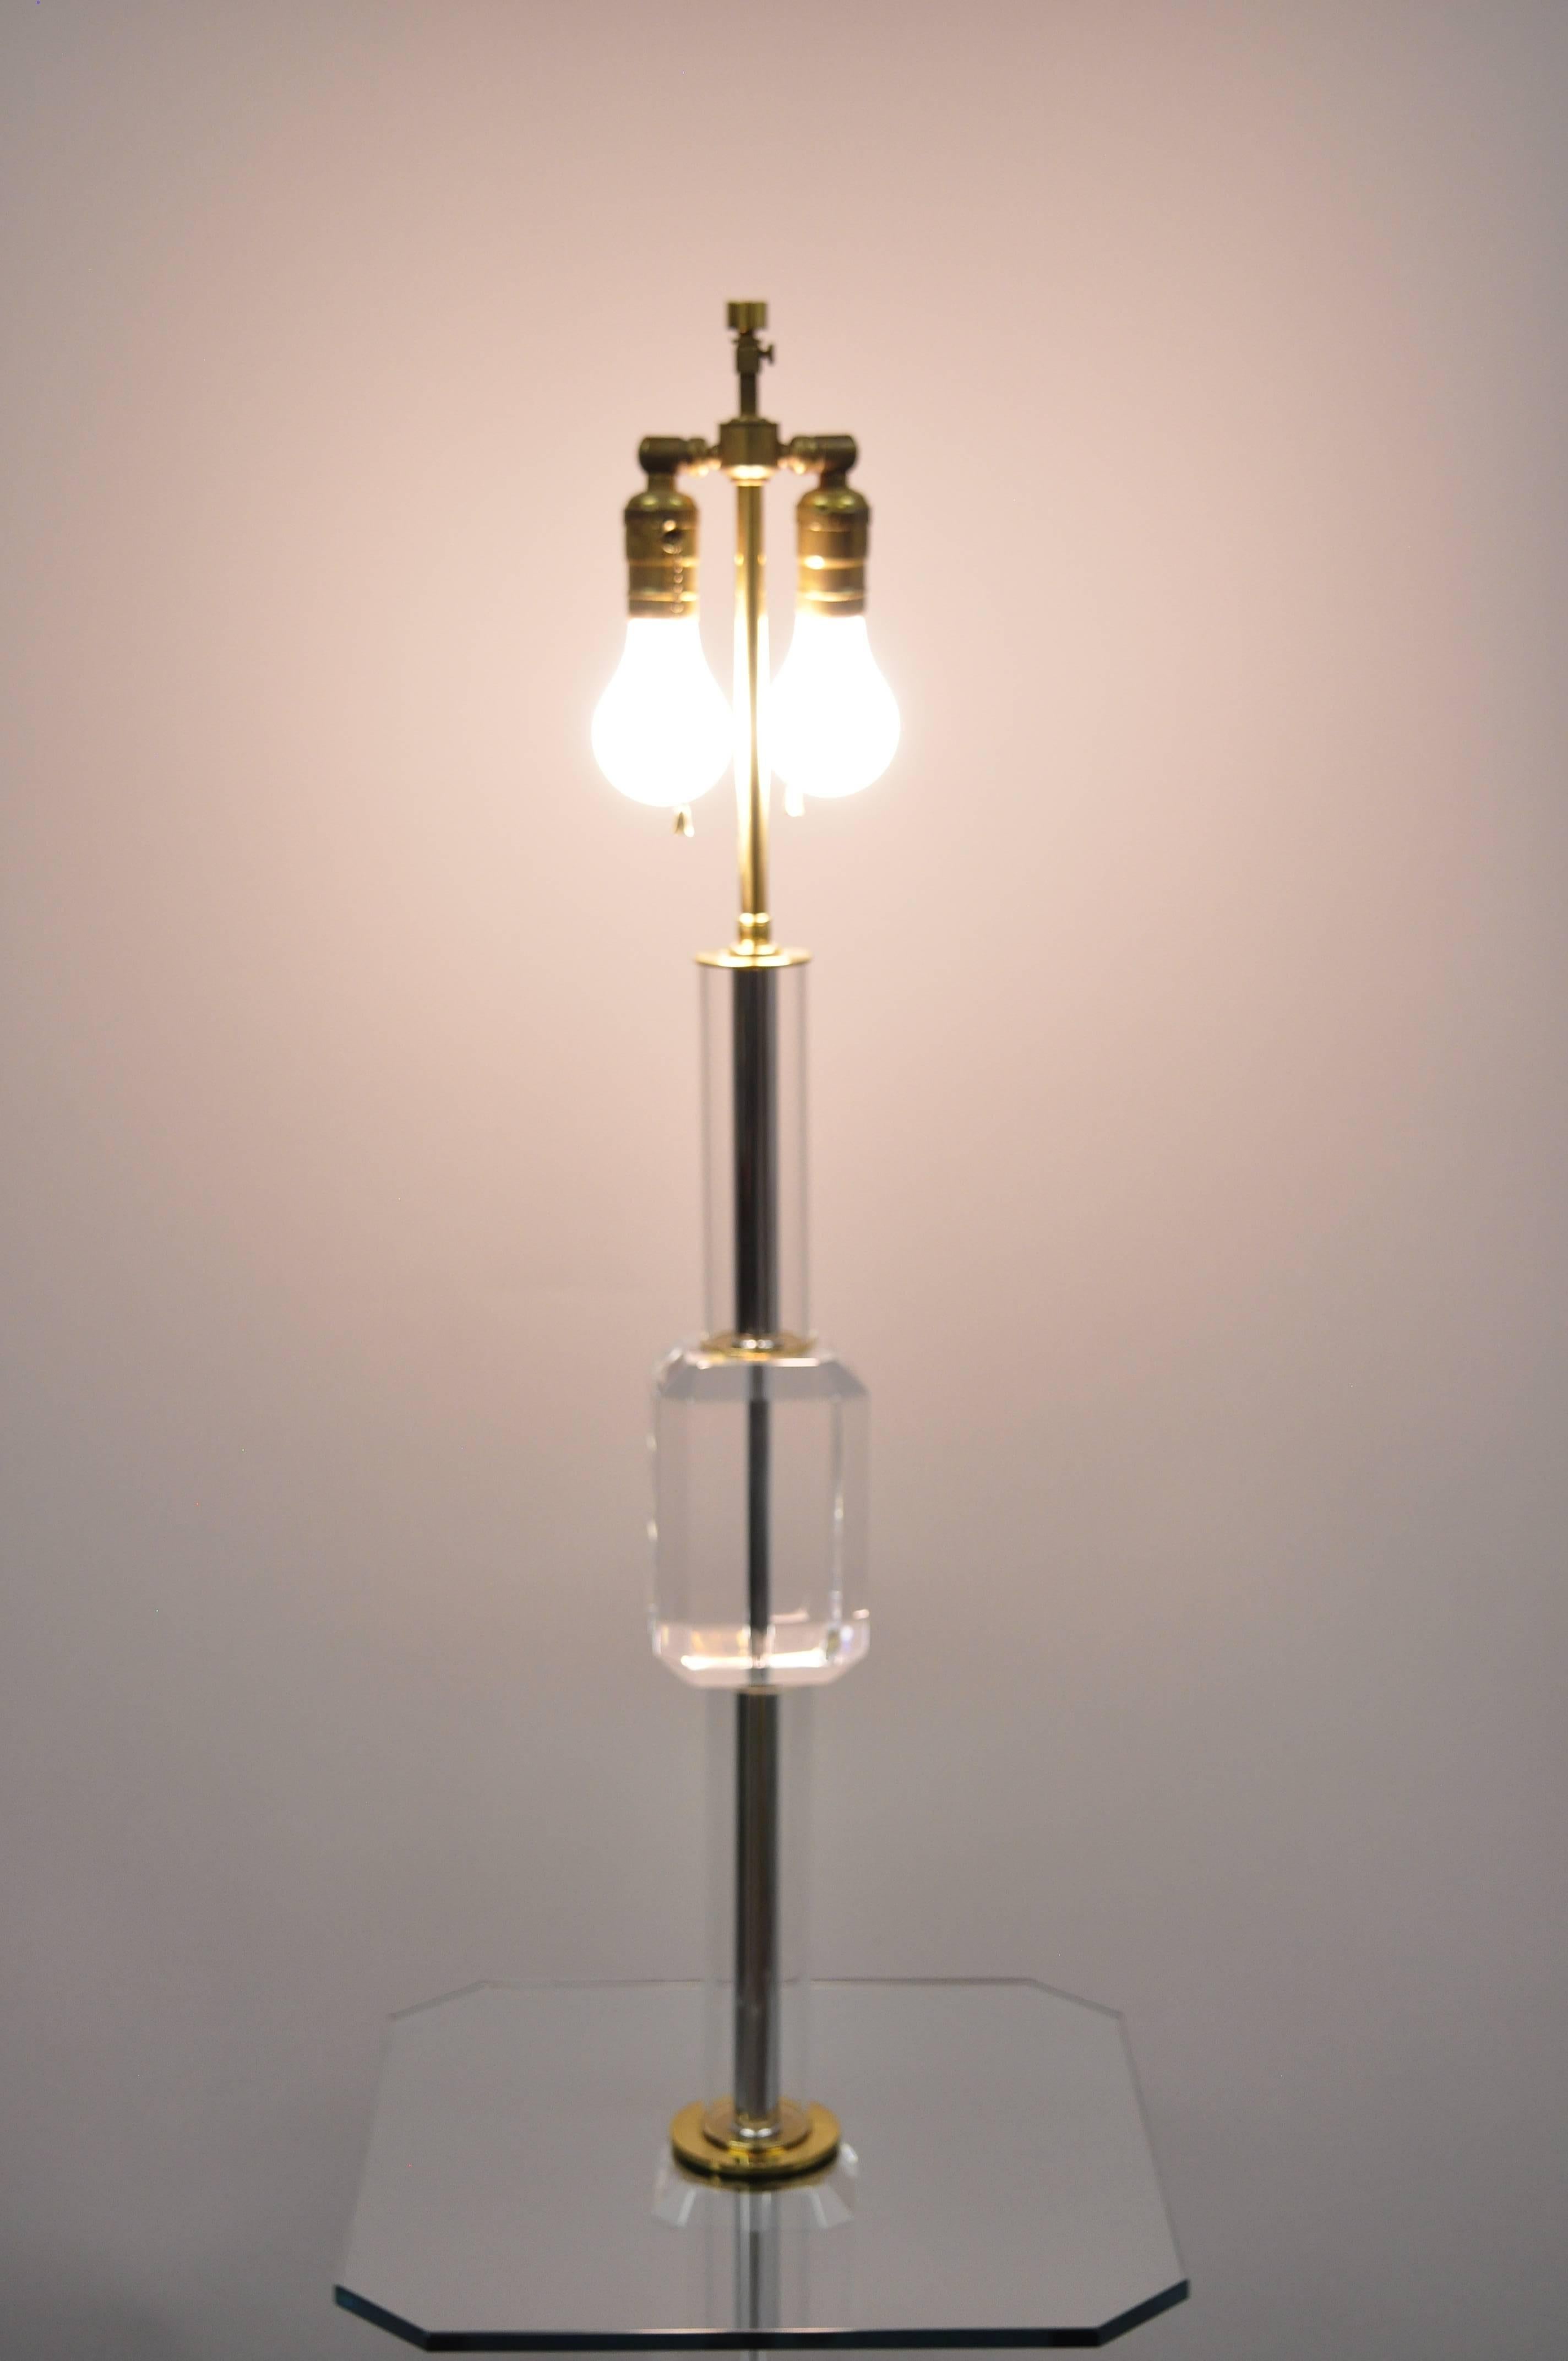 Vintage brass, Lucite and glass Mid-Century Modern table floor lamp in the Karl Springer style. Item is in remarkable vintage condition and is basically flawless. Lamp features adjustable finial, double light socket, glass top, chrome central shaft,